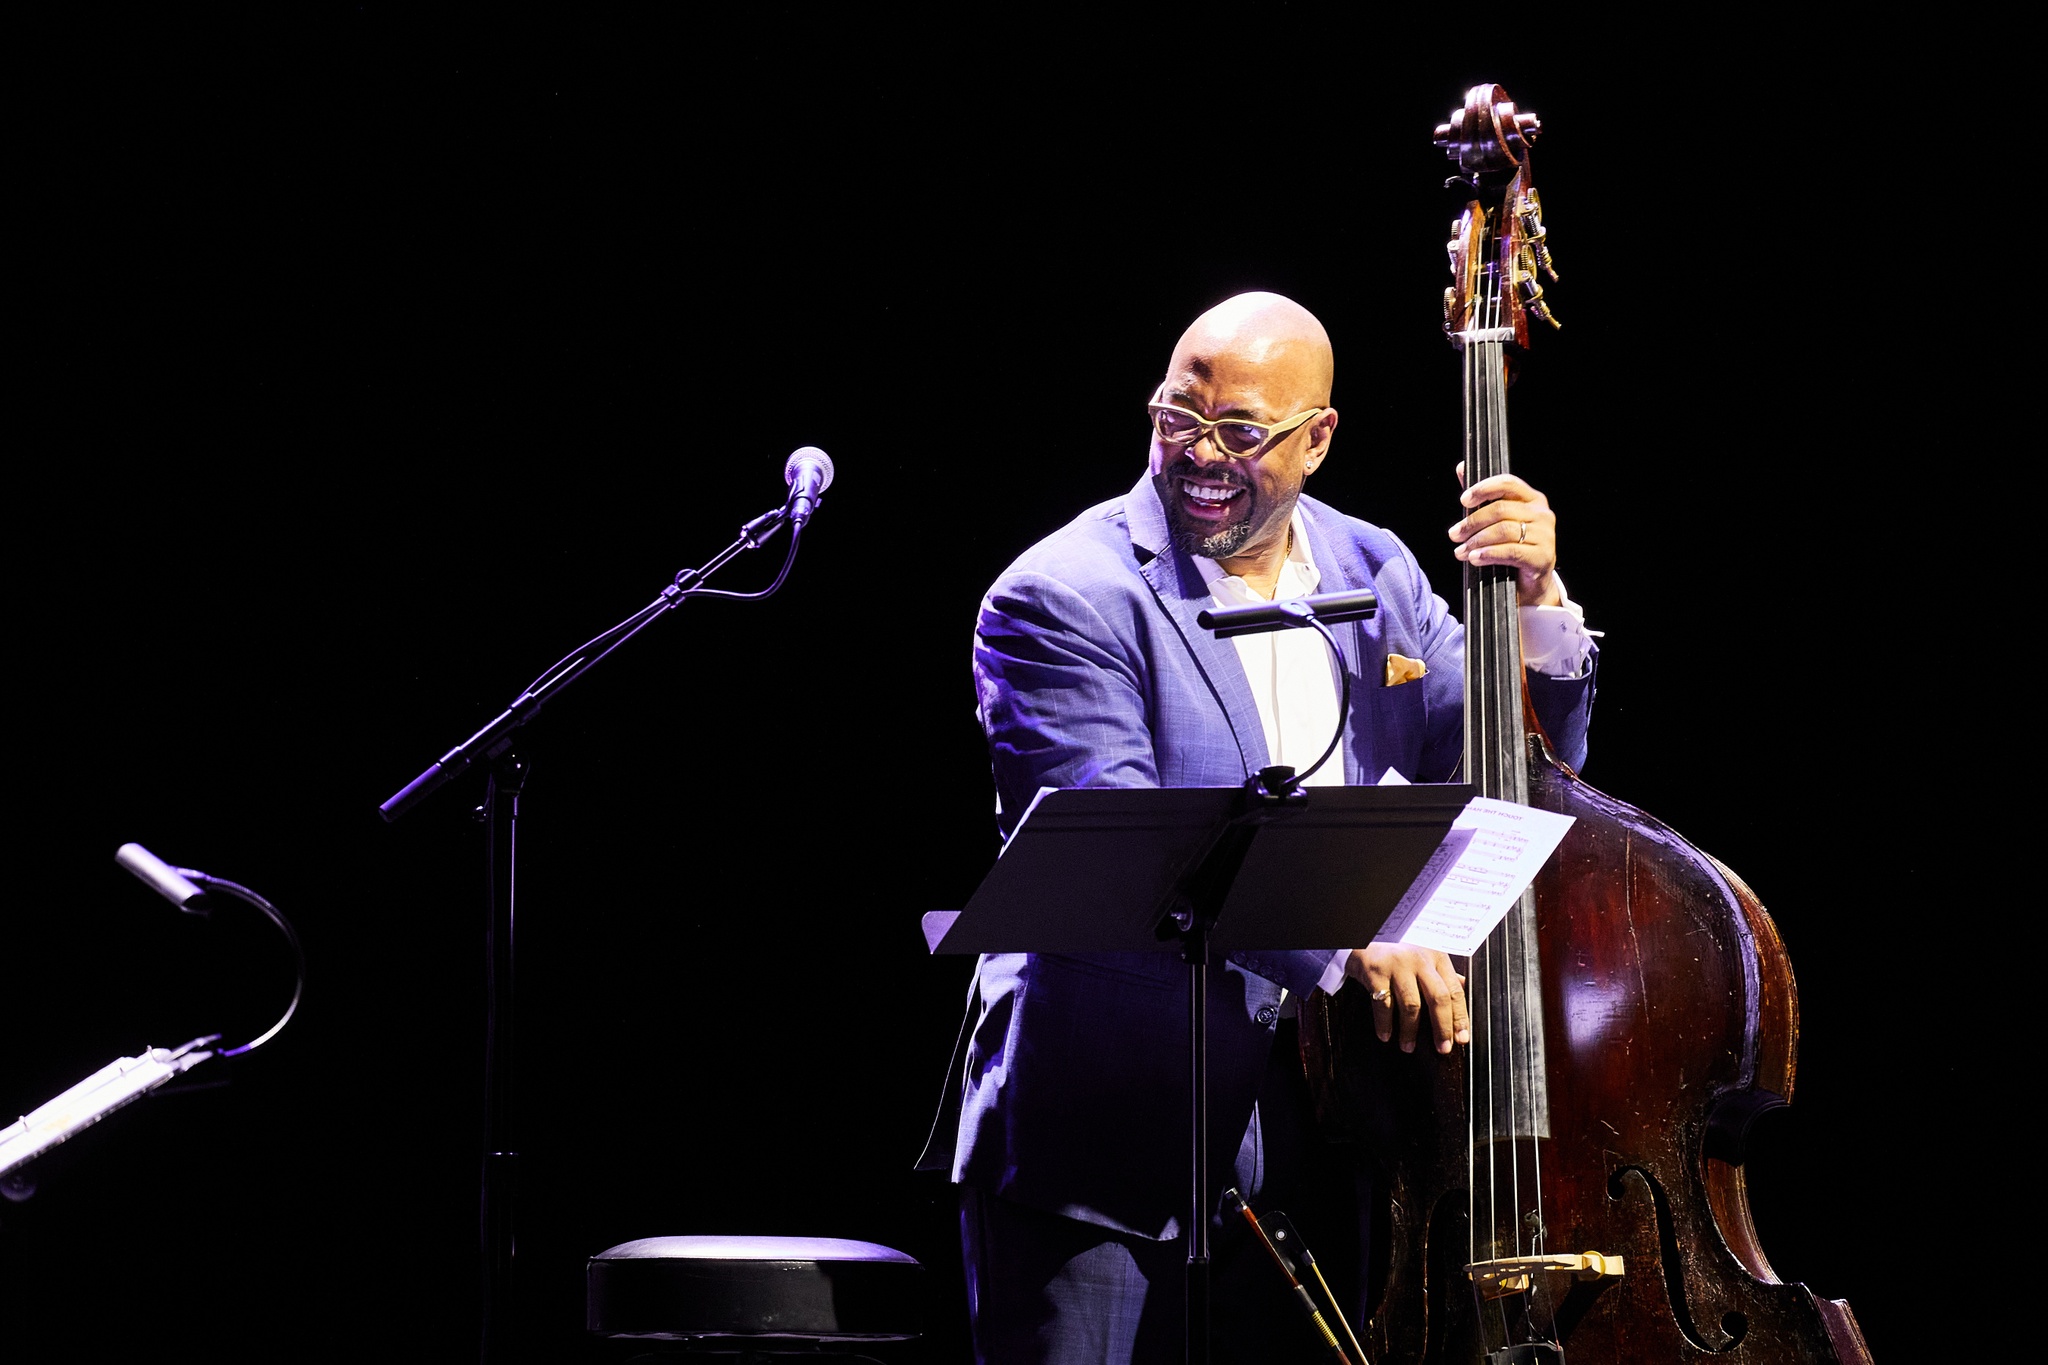 A bassist holding his instrument and laughing while on stage performing. He is a Black man with a bald head and he wears a blue jacket.